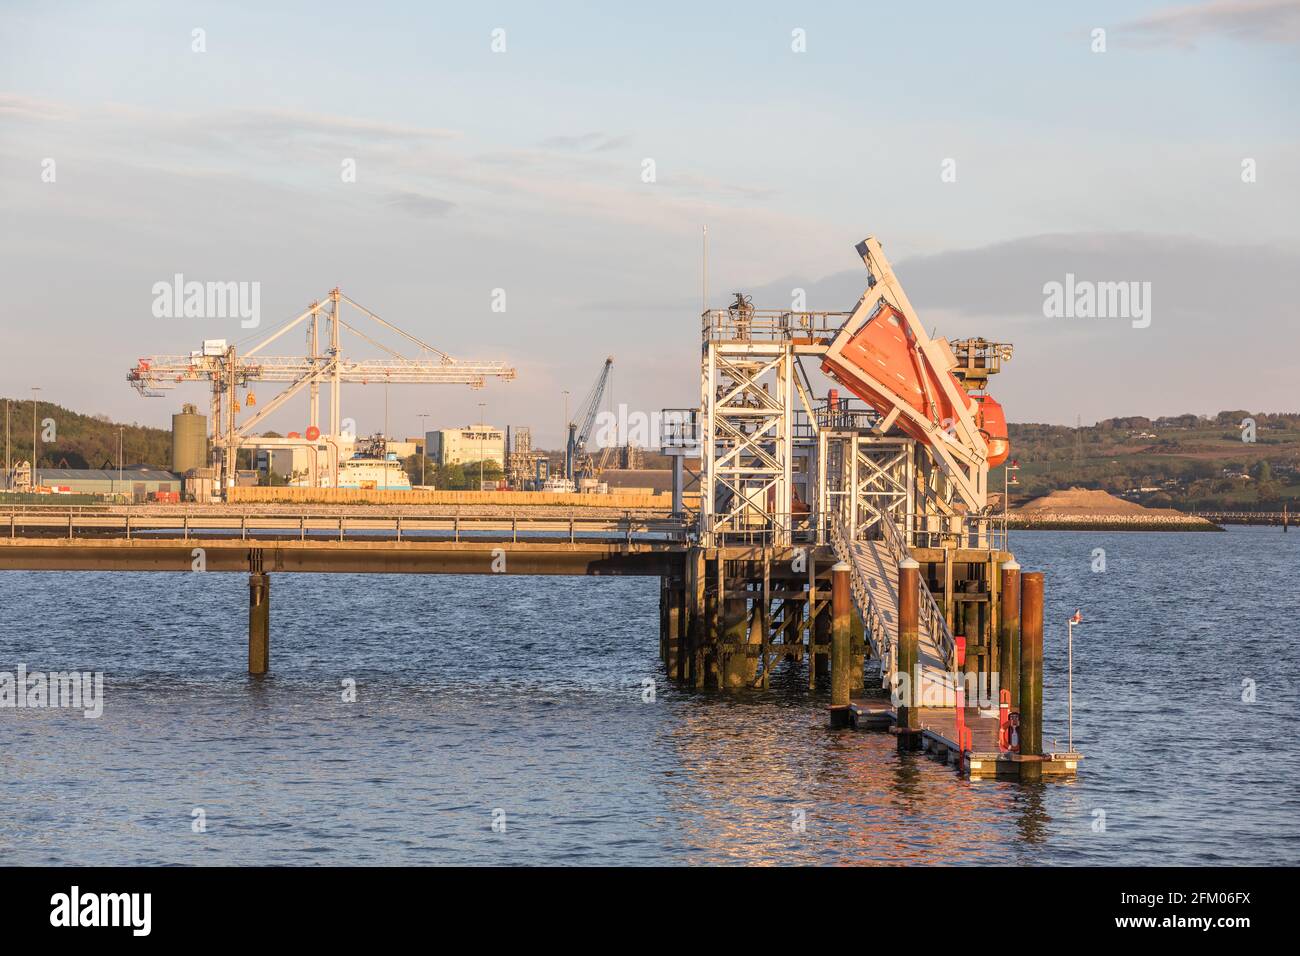 Ringaskiddy, Cork, Ireland. 05th May, 2021. An early morning view of the lifeboat simulator used for training mariners on the campus of the National Maritime College in Ringaskiddy, Co. Cork, Ireland.  - Credit; David Creedon / Alamy Live News Stock Photo